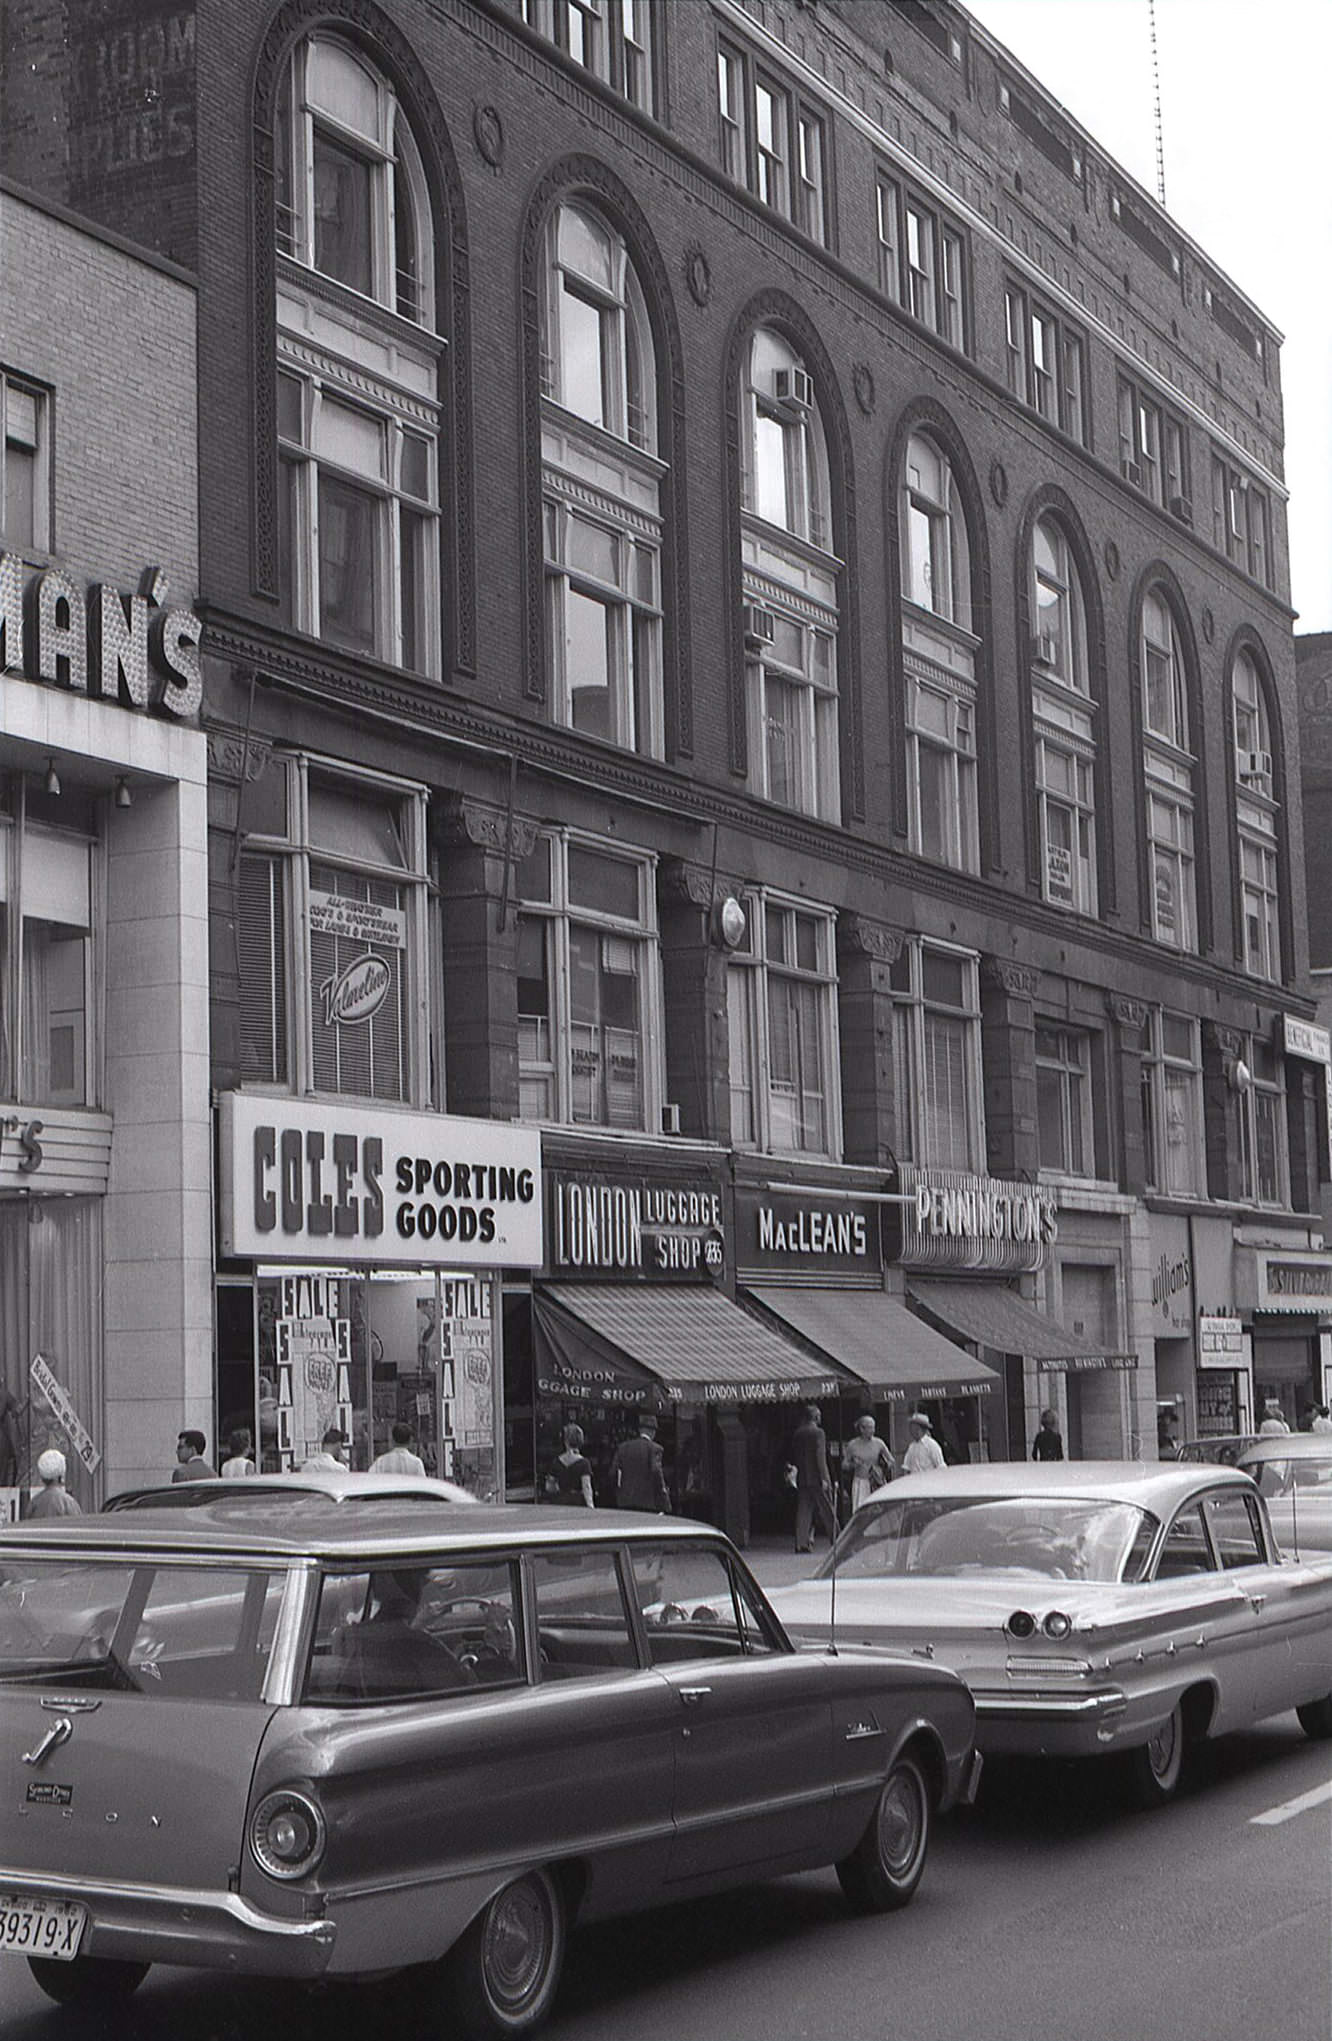 Another look at the Ryrie Building on the northeast corner of Yonge and Shuter Streets, this time from the north, providing a good view of the ground floor shops in 1962.